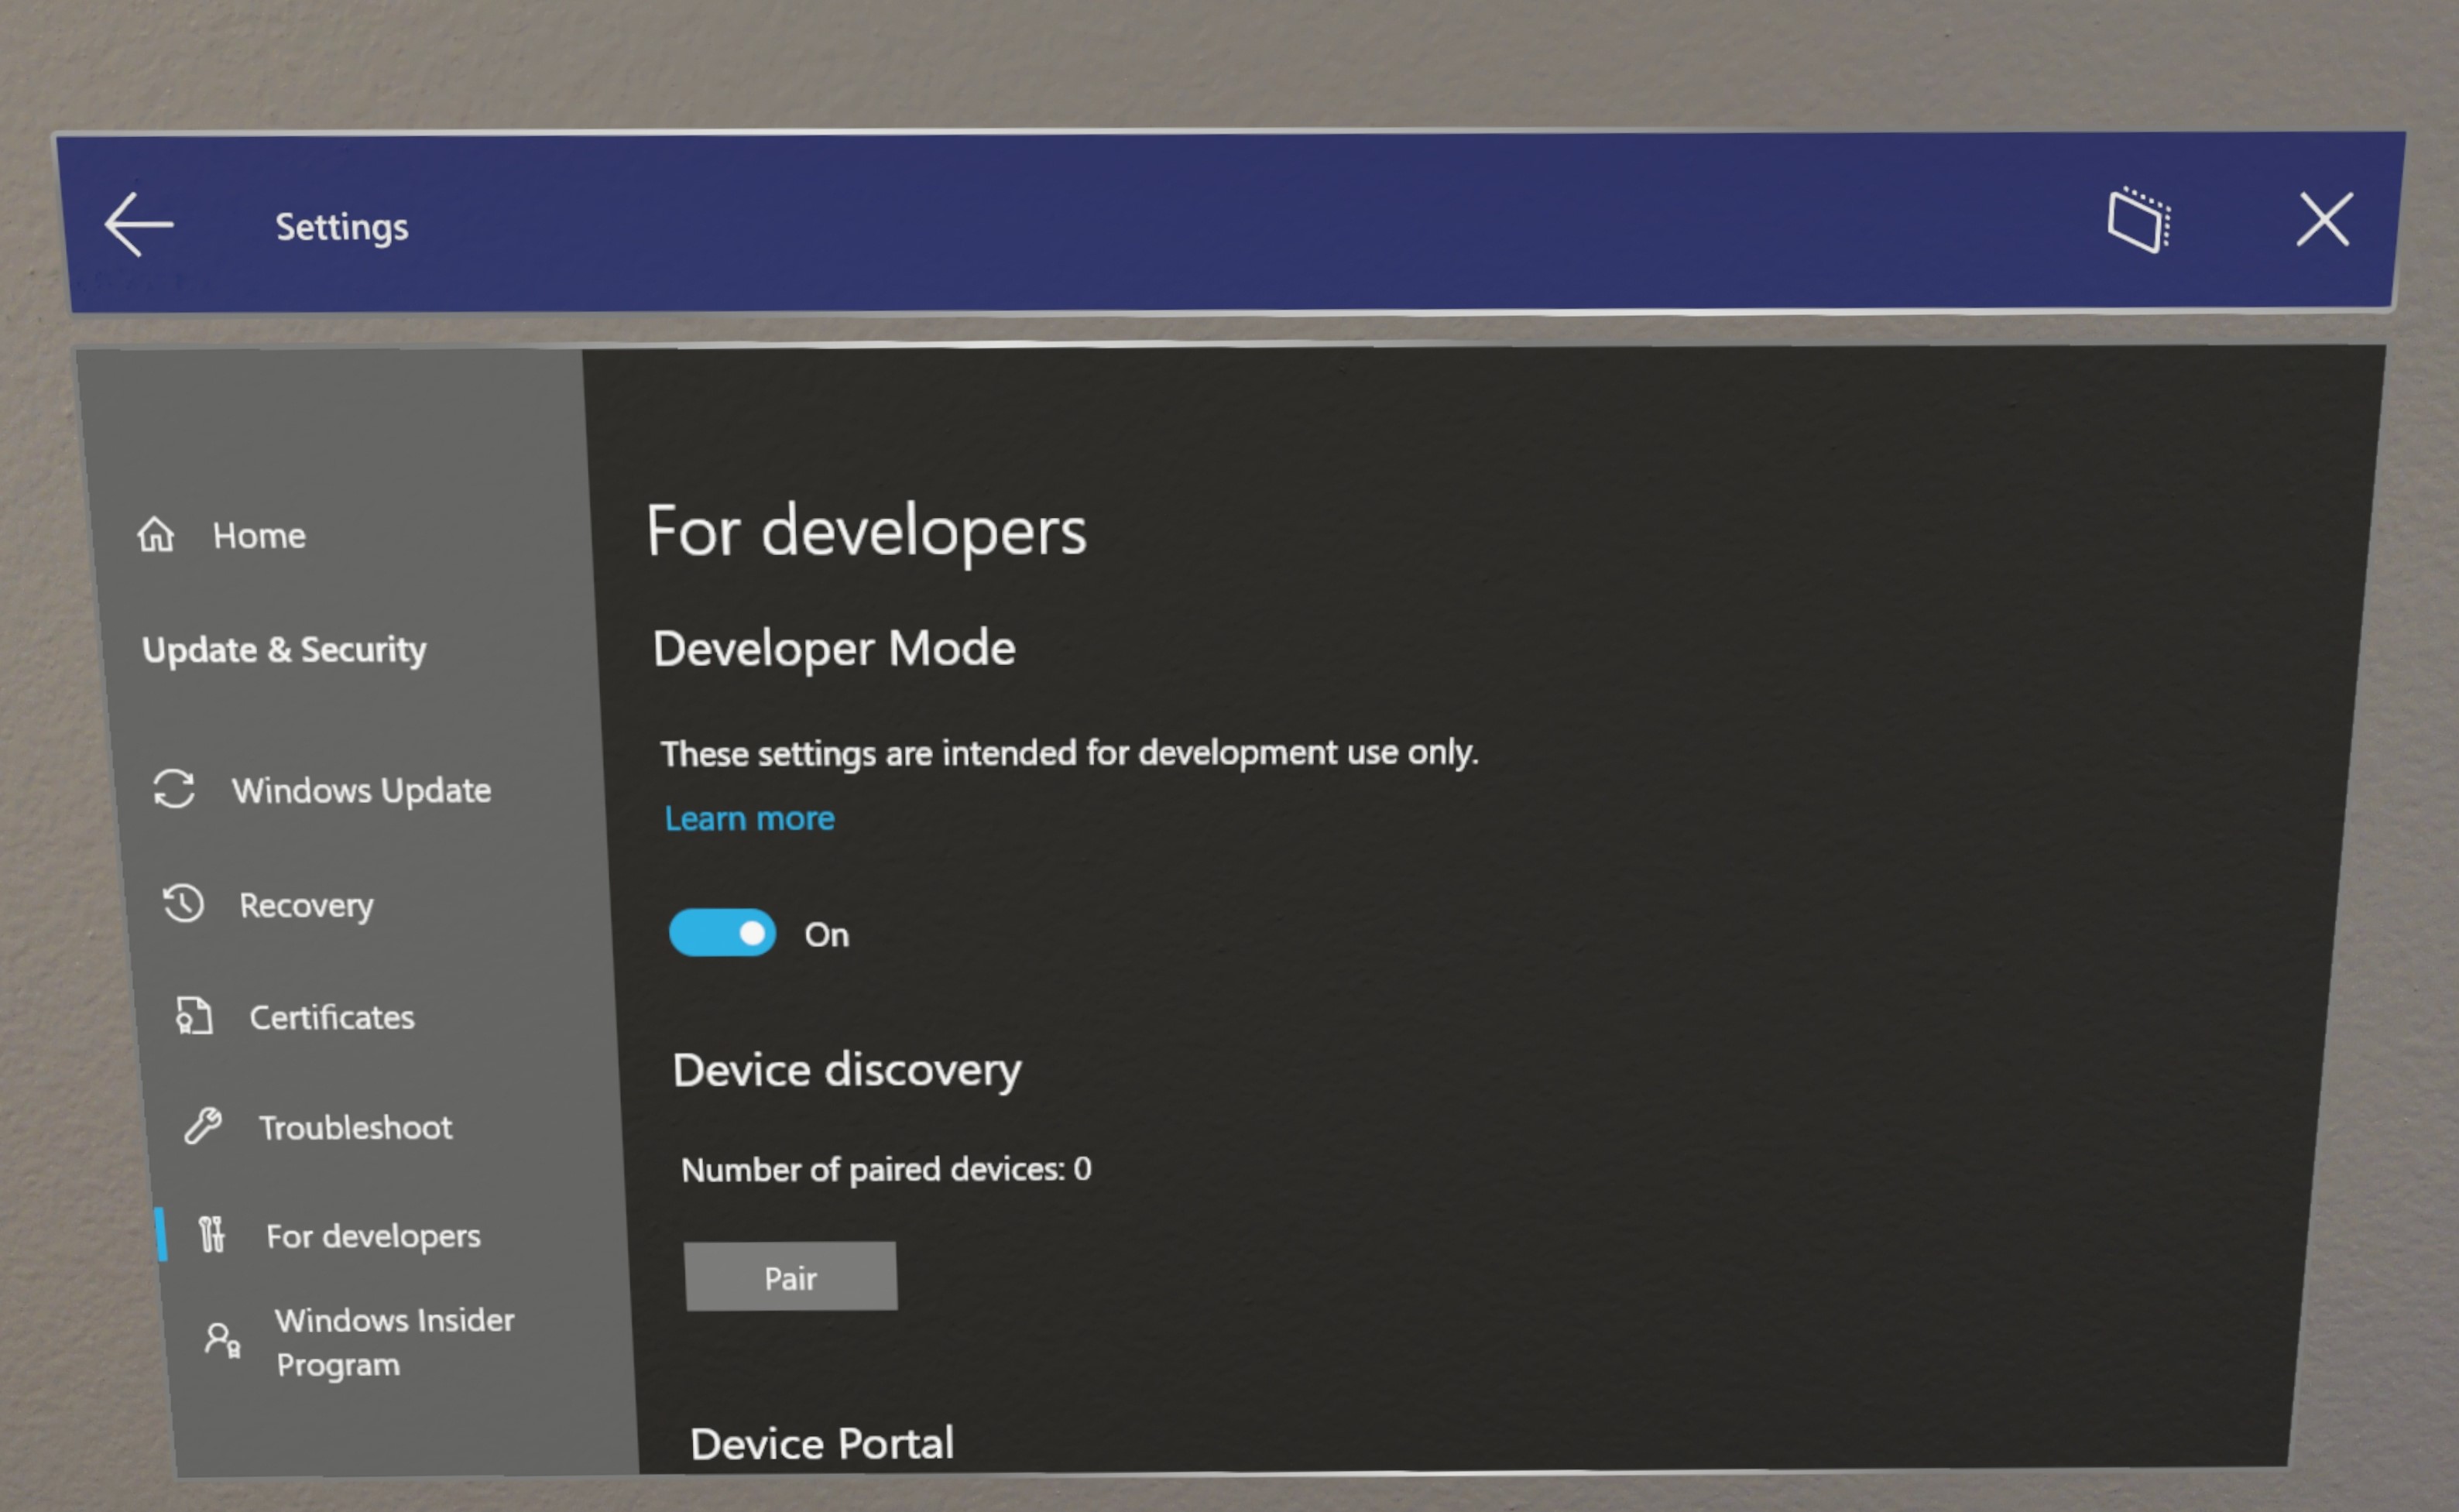 Working with Running Apps, Using the Windows 10 Interface